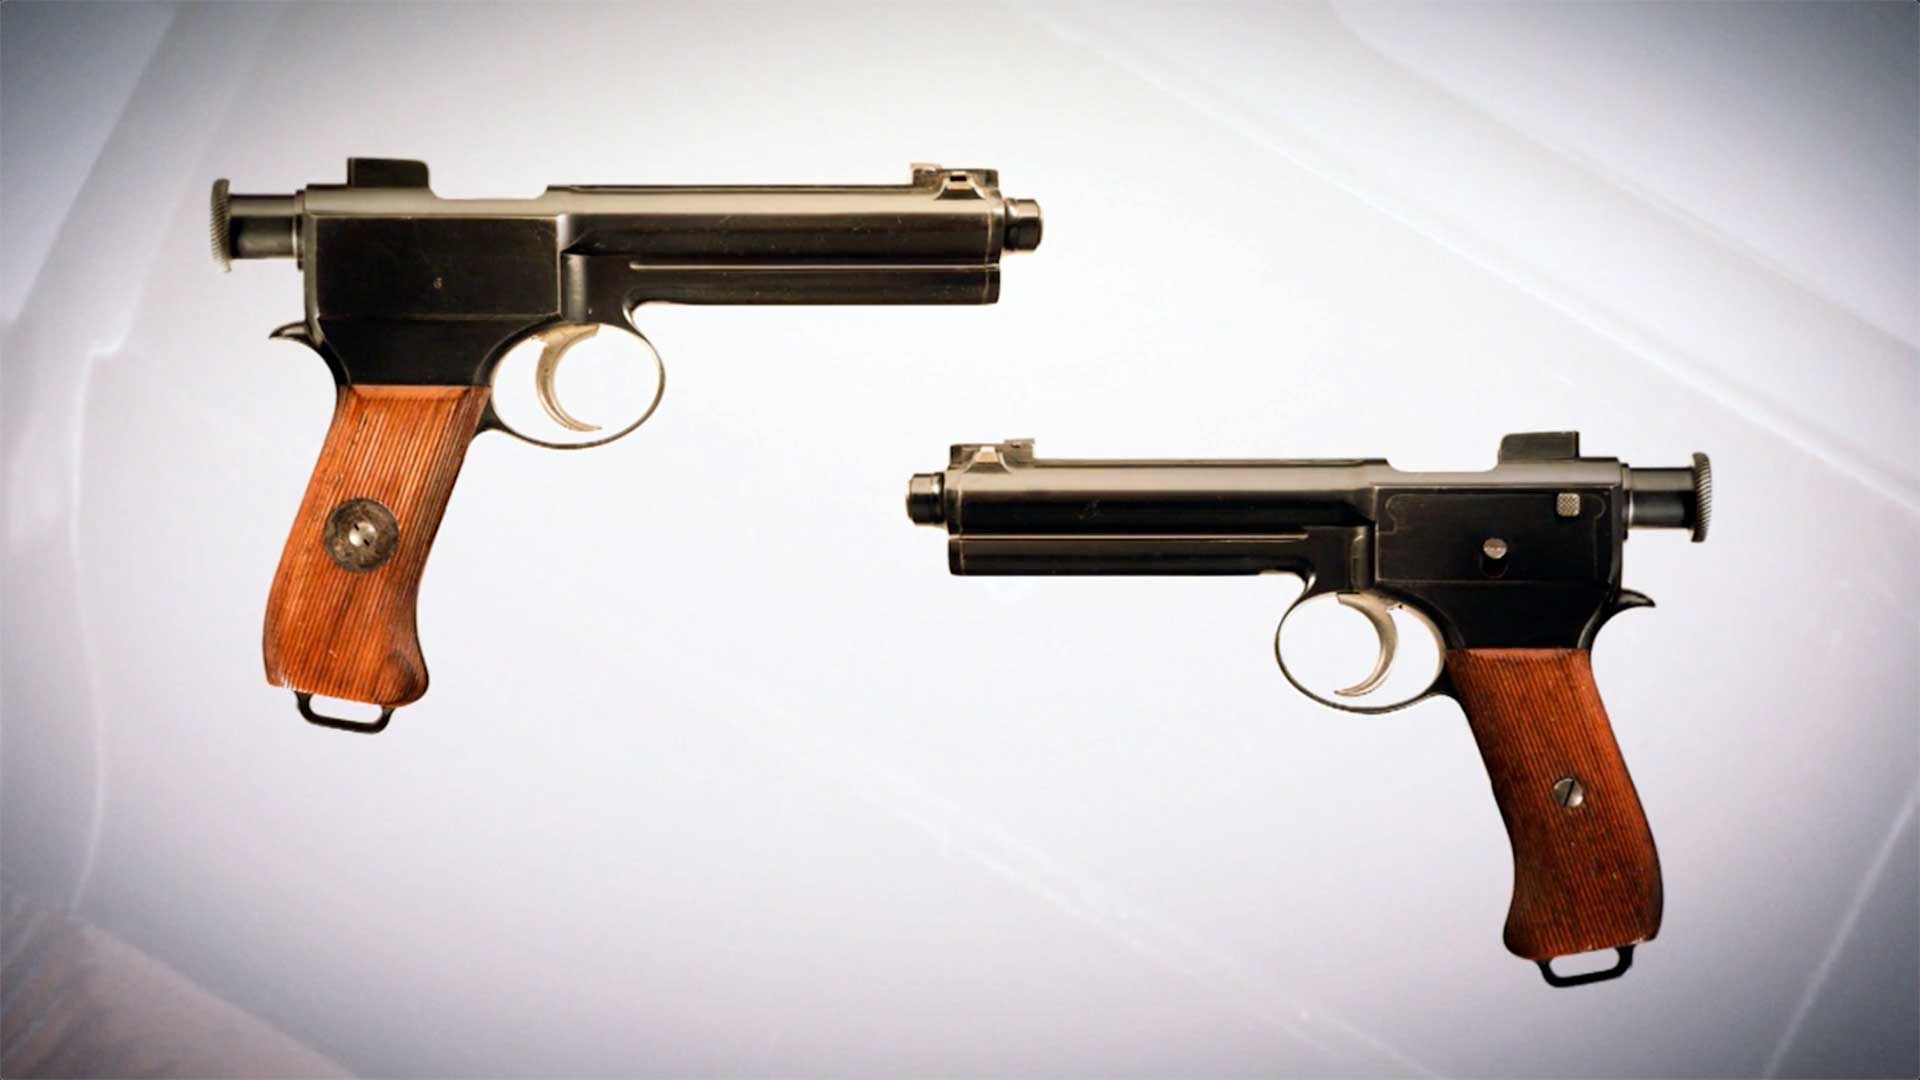 Left and right profile view of the M1907 Roth-Steyr pistol.